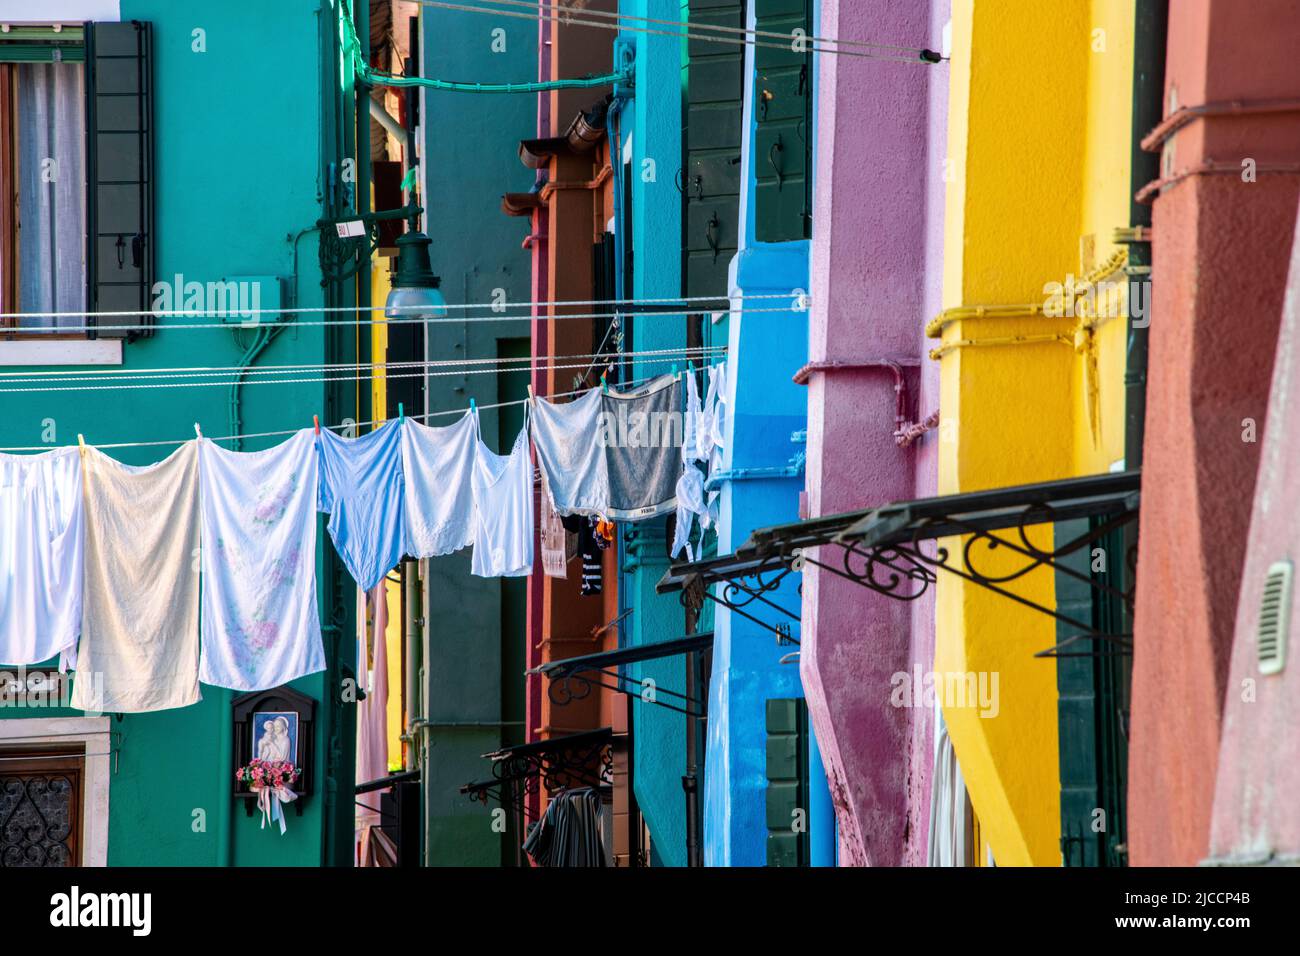 Detail view of a residential area in various bold colors Stock Photo